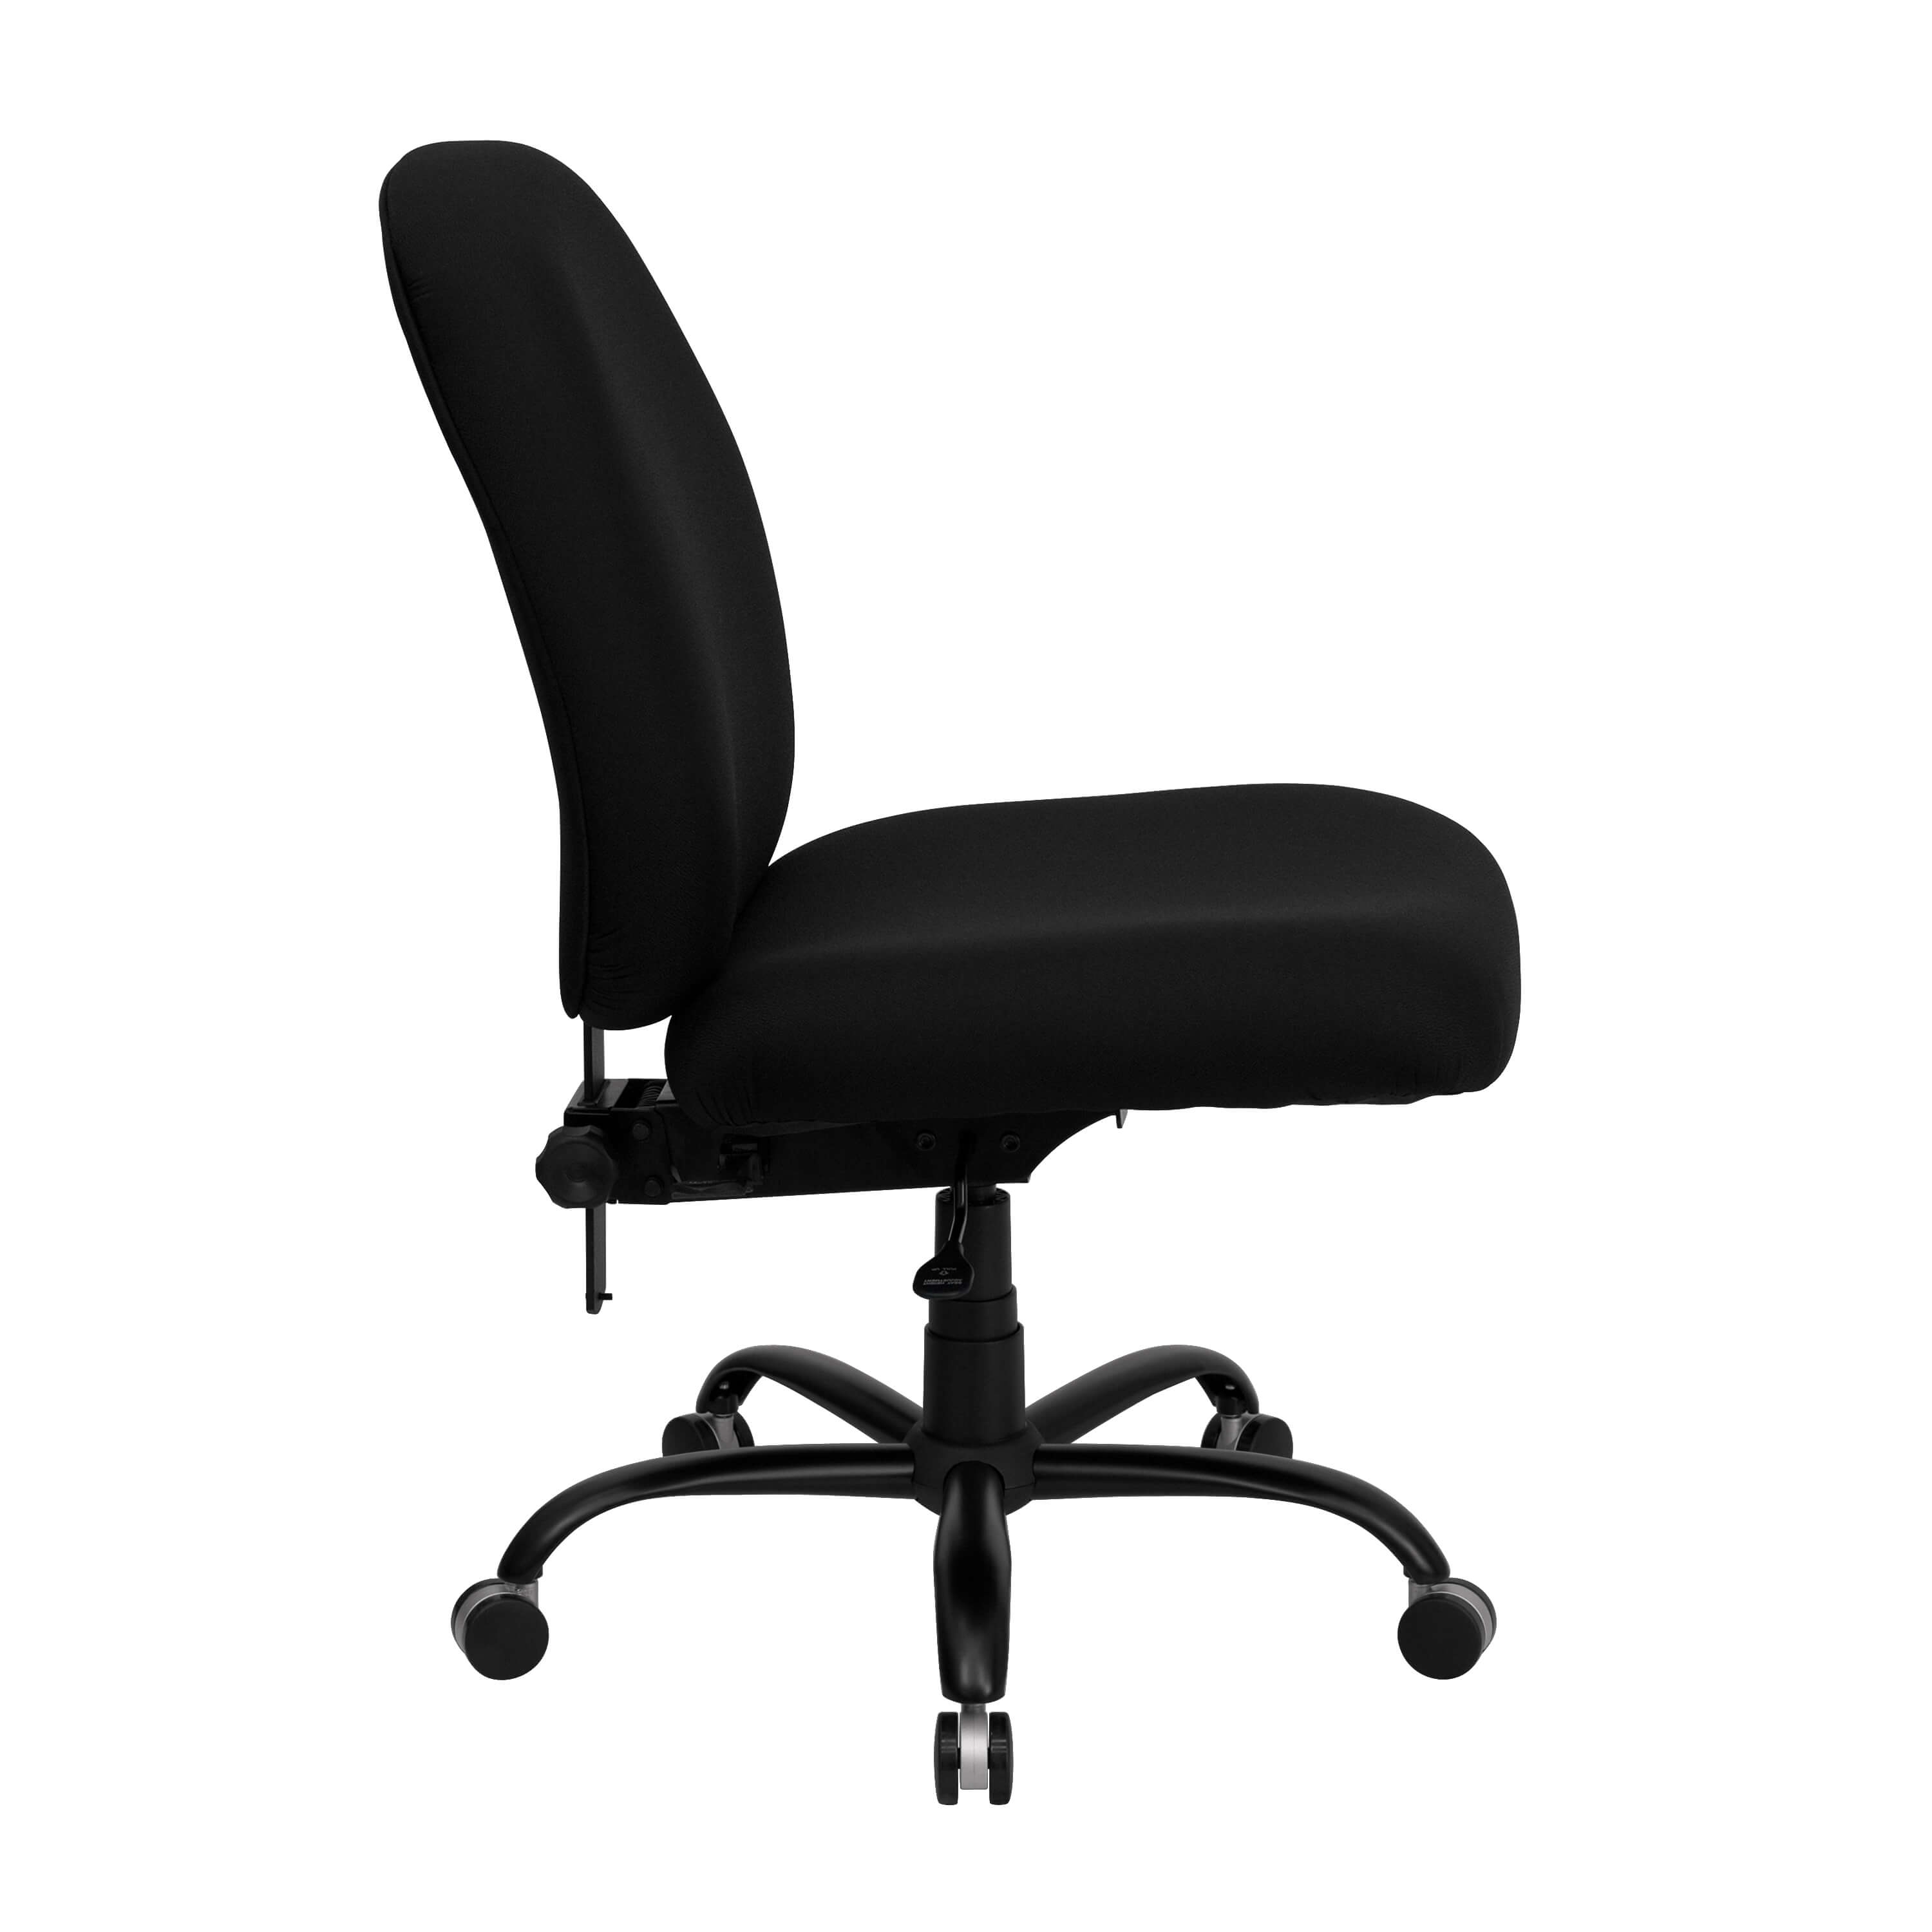 Big tall office chair side view